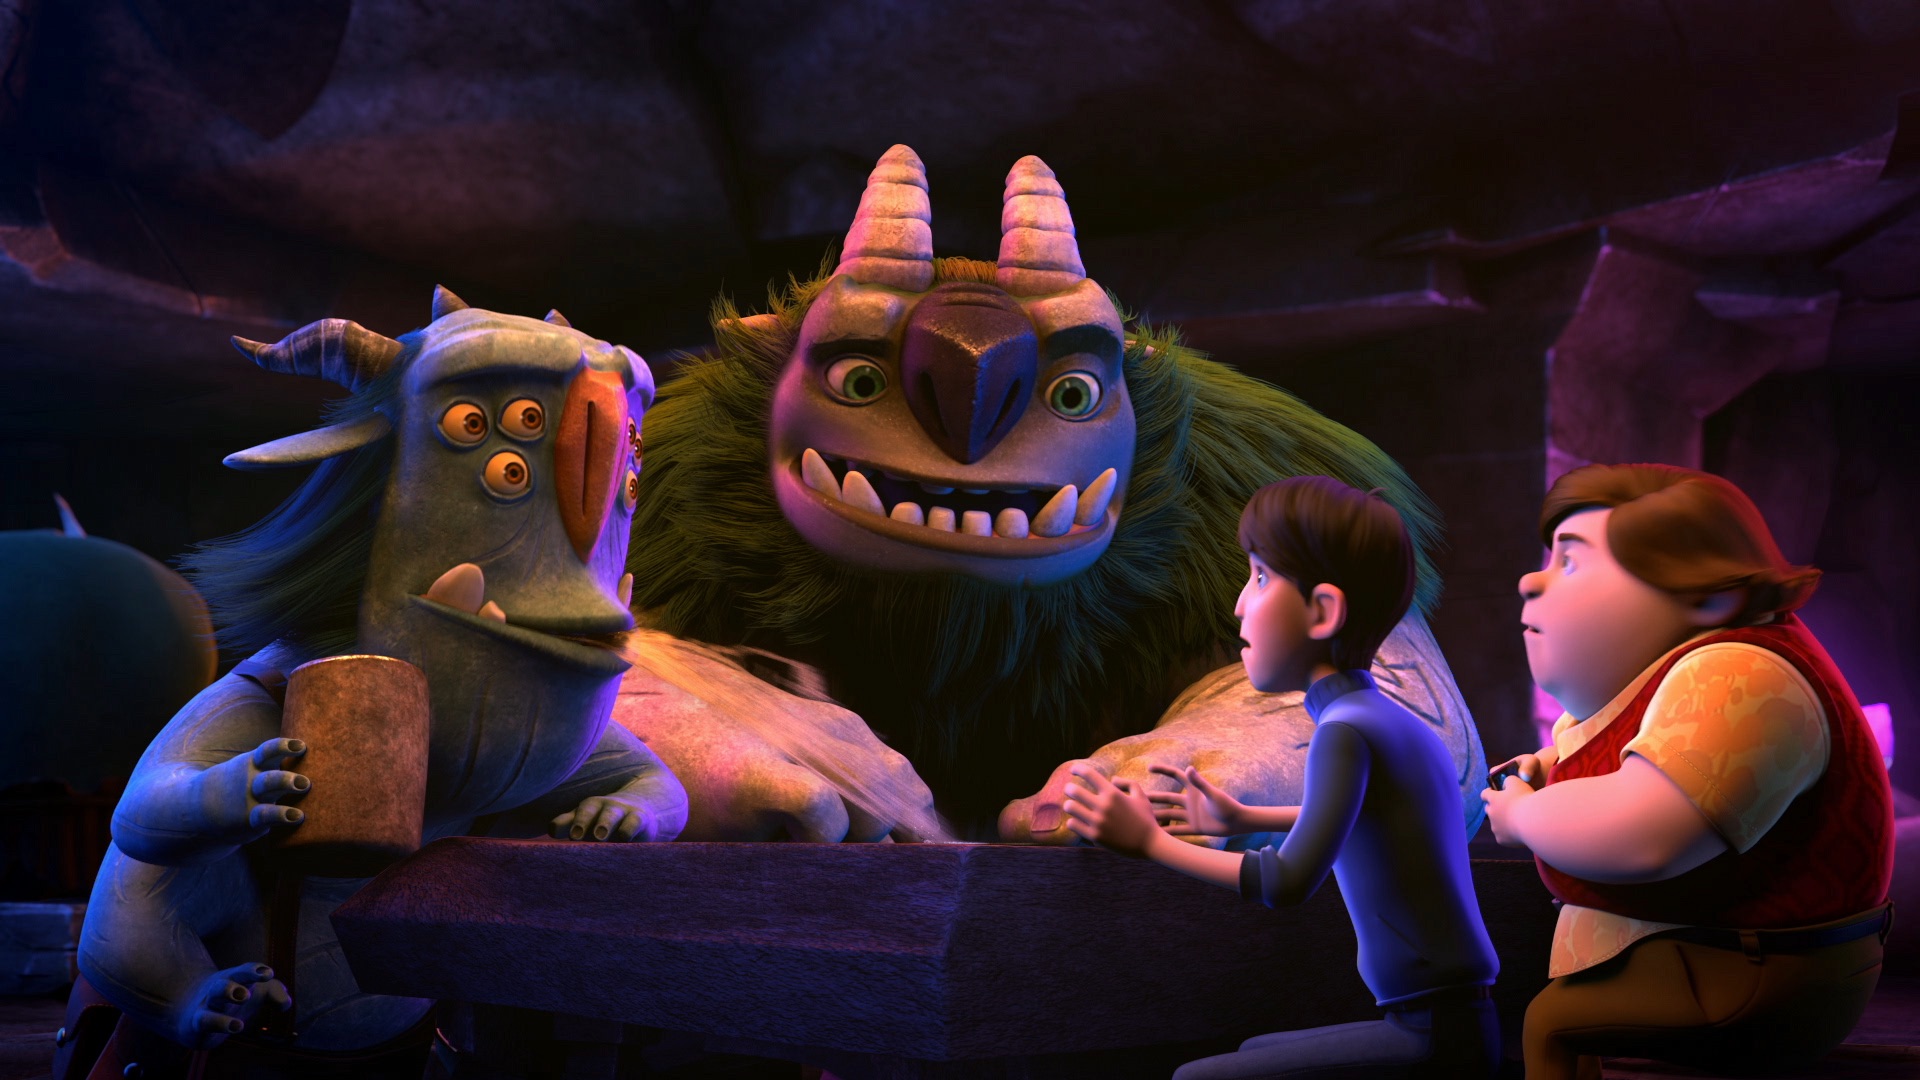 Trollhunters Is A Boredom Buster Holiday Gift from Netflix